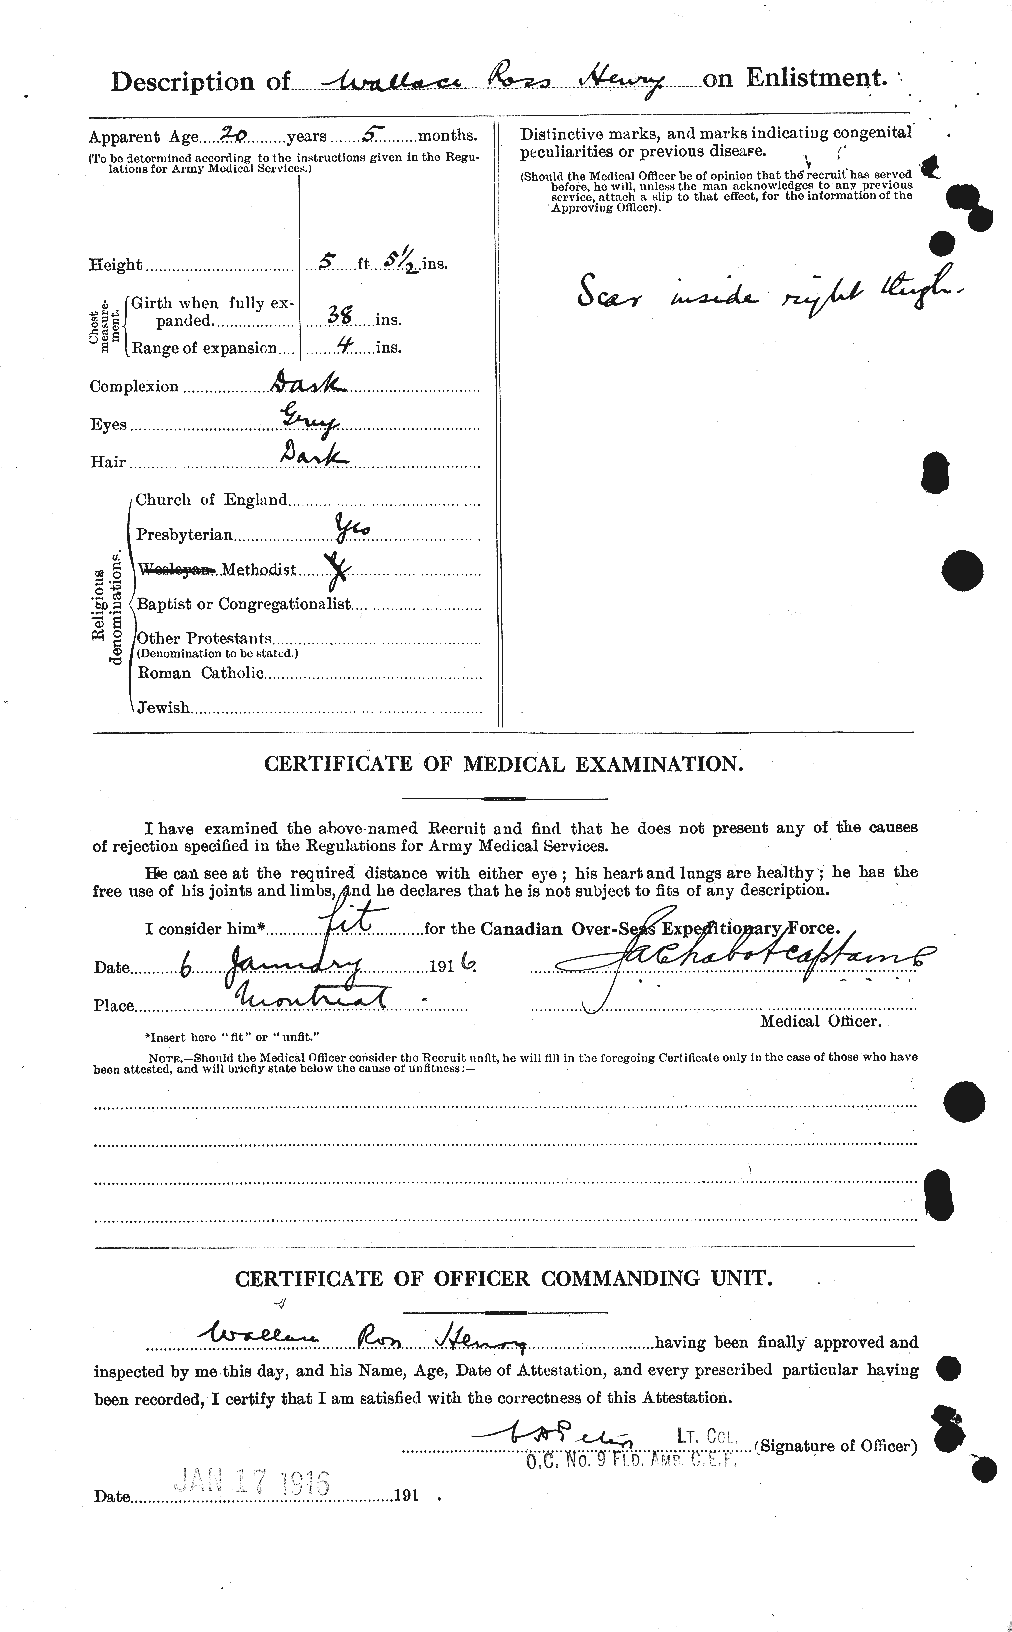 Personnel Records of the First World War - CEF 387749b